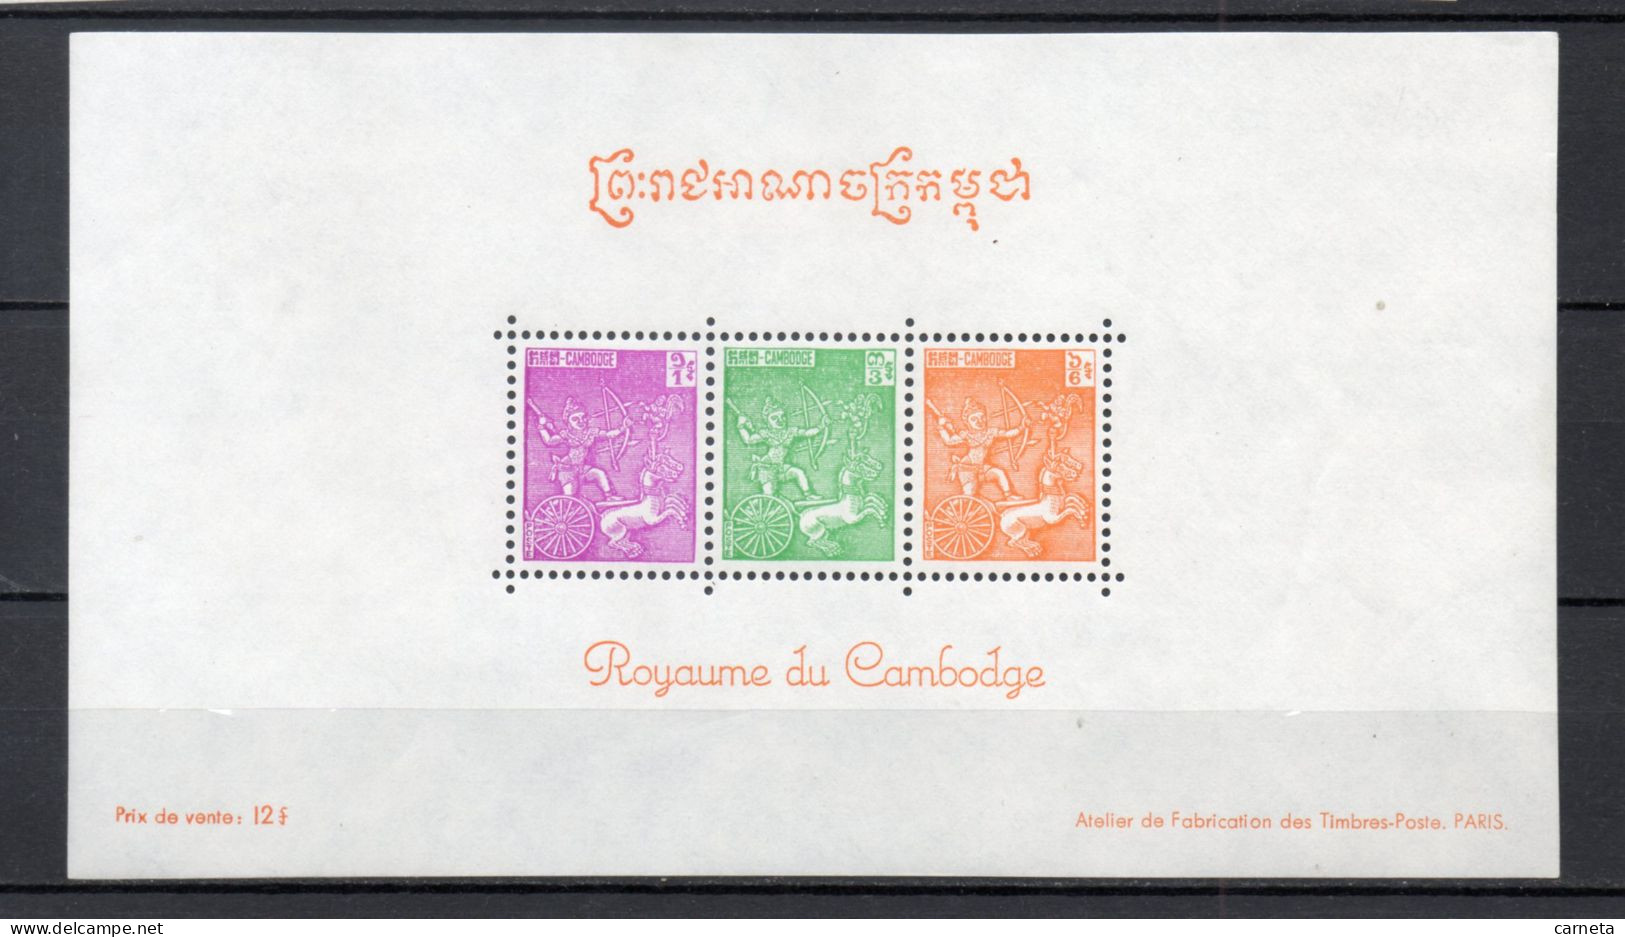 CAMBODGE  BLOC N° 19    NEUF SANS CHARNIERE   COTE  4.50€    HOMMAGE AUX COMBATTANTS - Cambodja